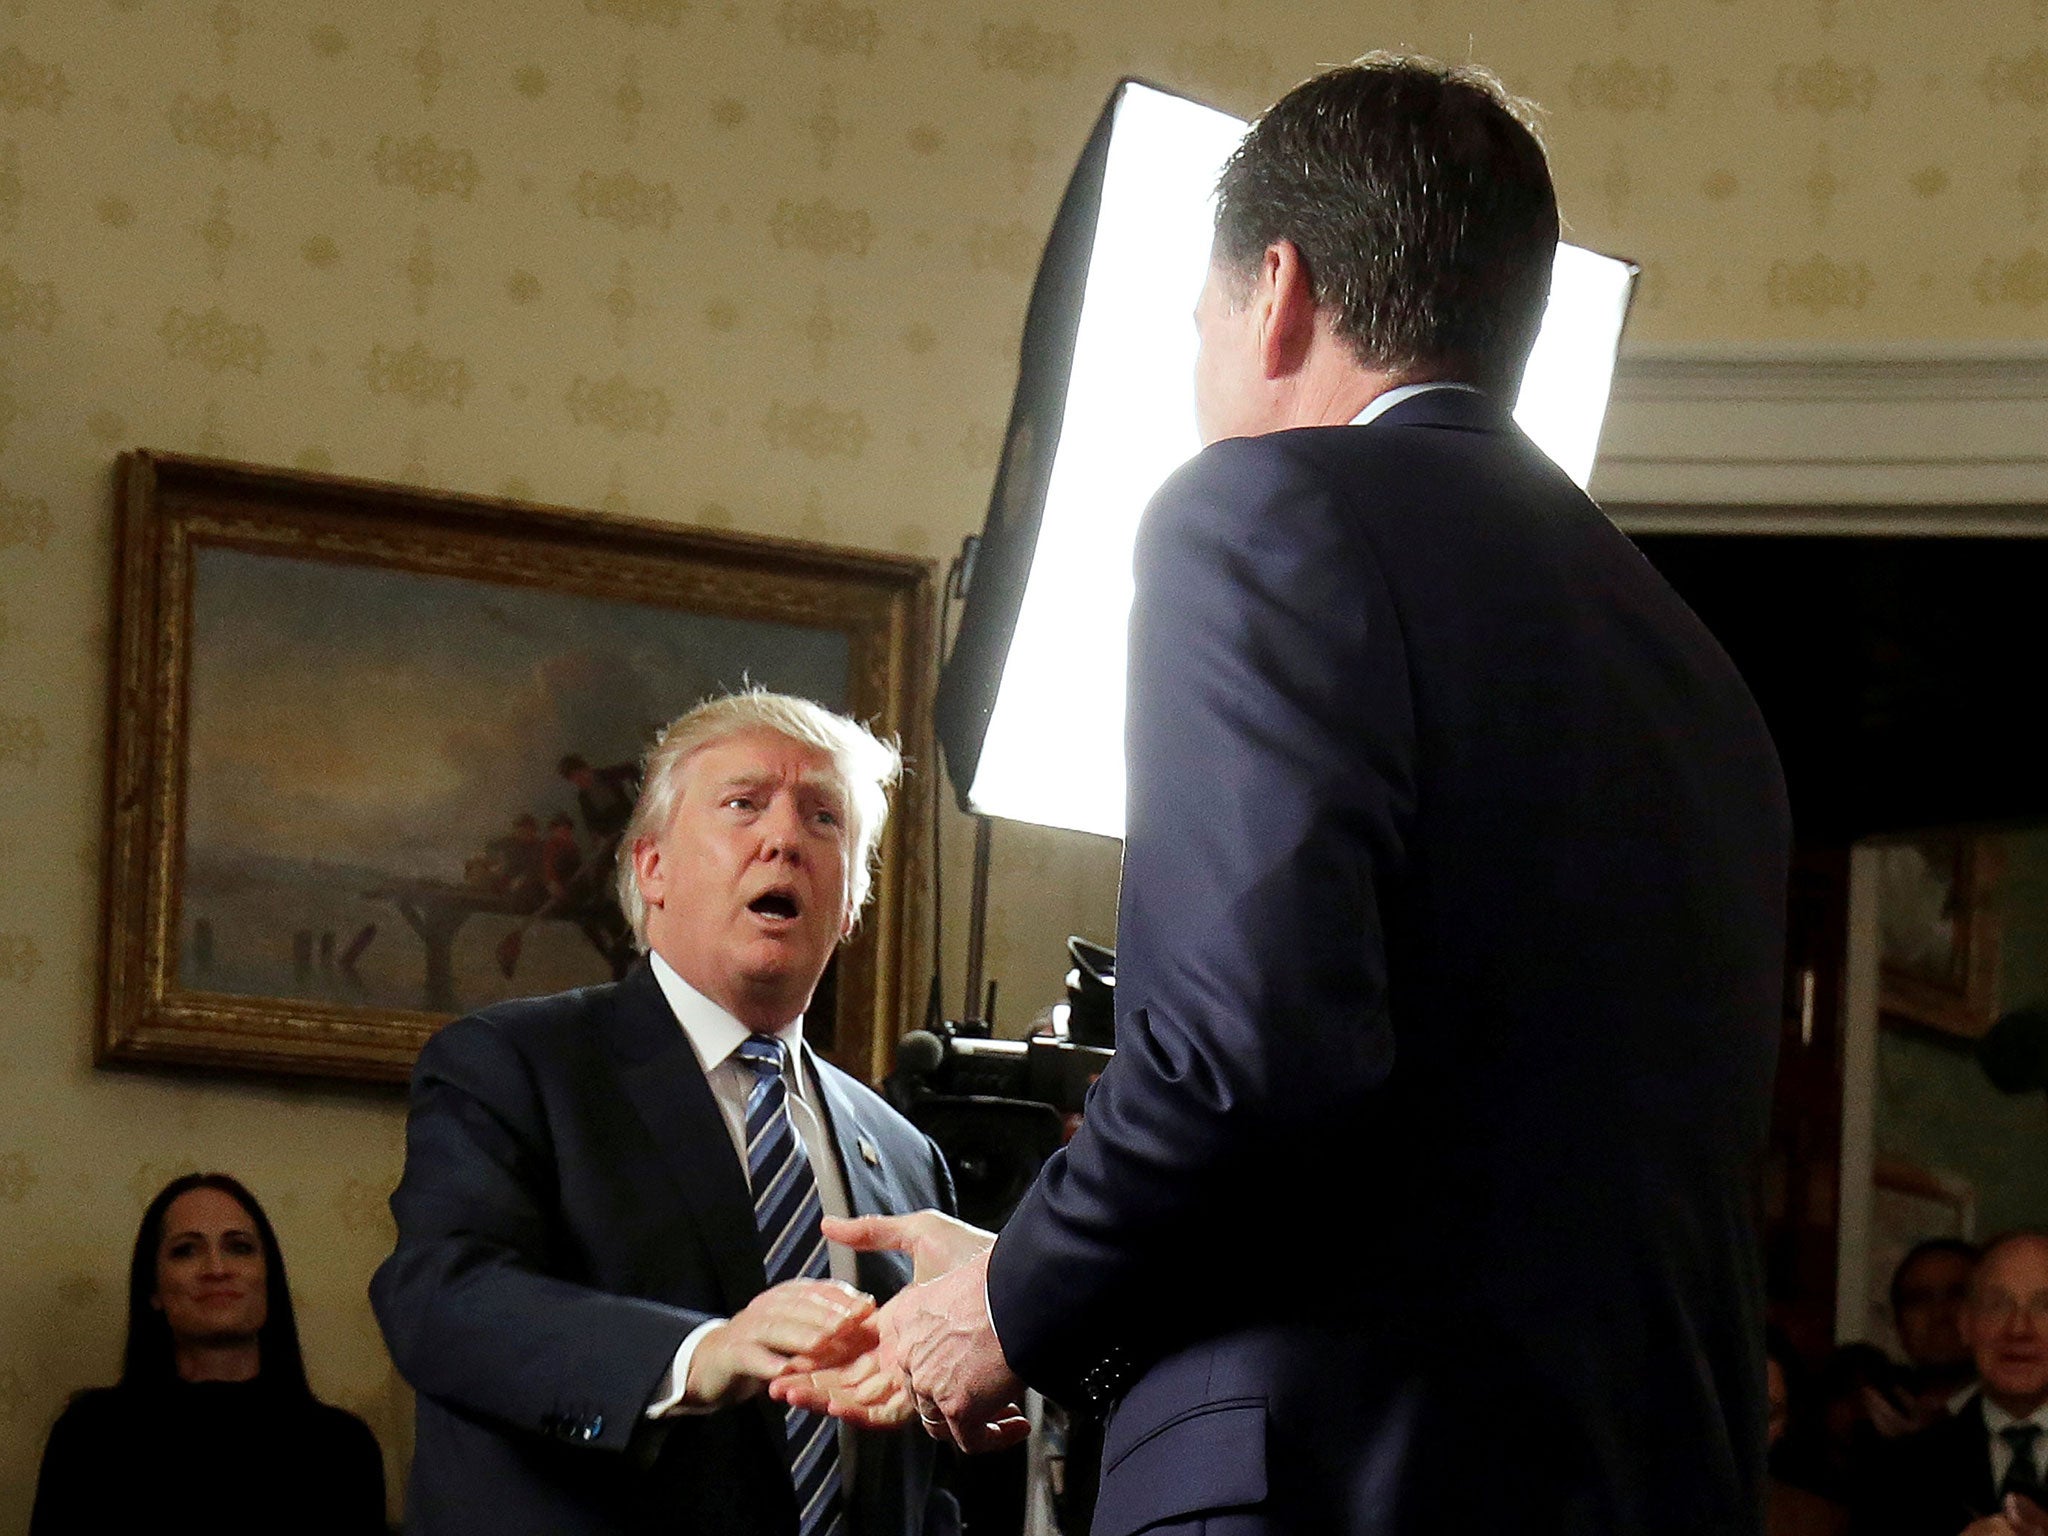 File: Trump greets the now former director of the FBI, James Comey, at the White House